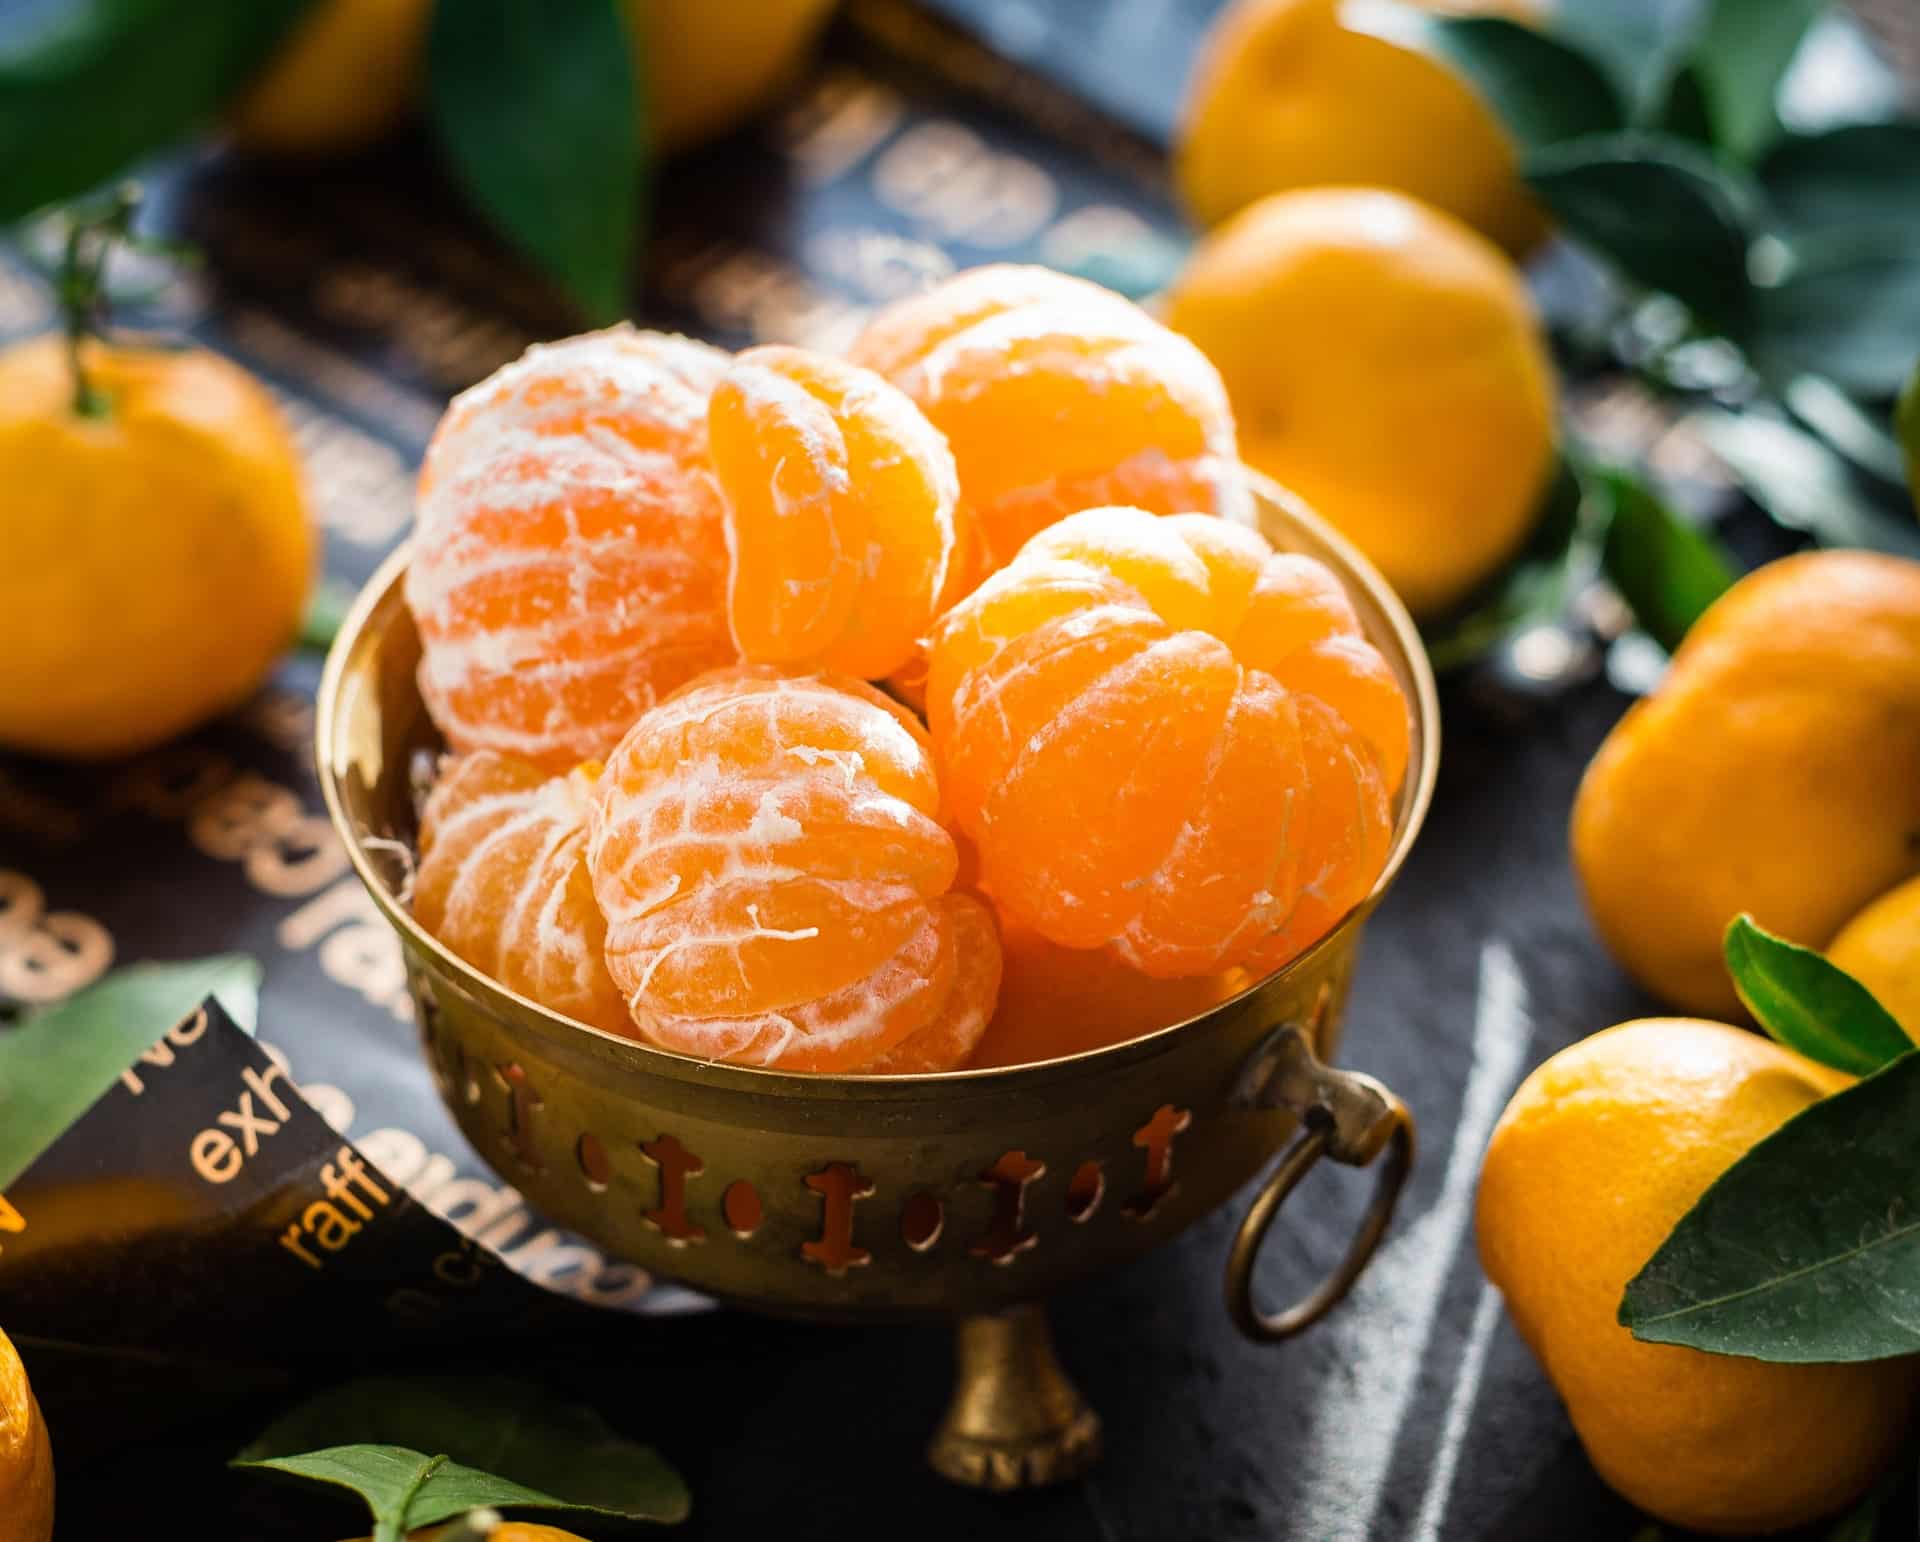 The Most Exported Thing To Russia Is Mandarin!